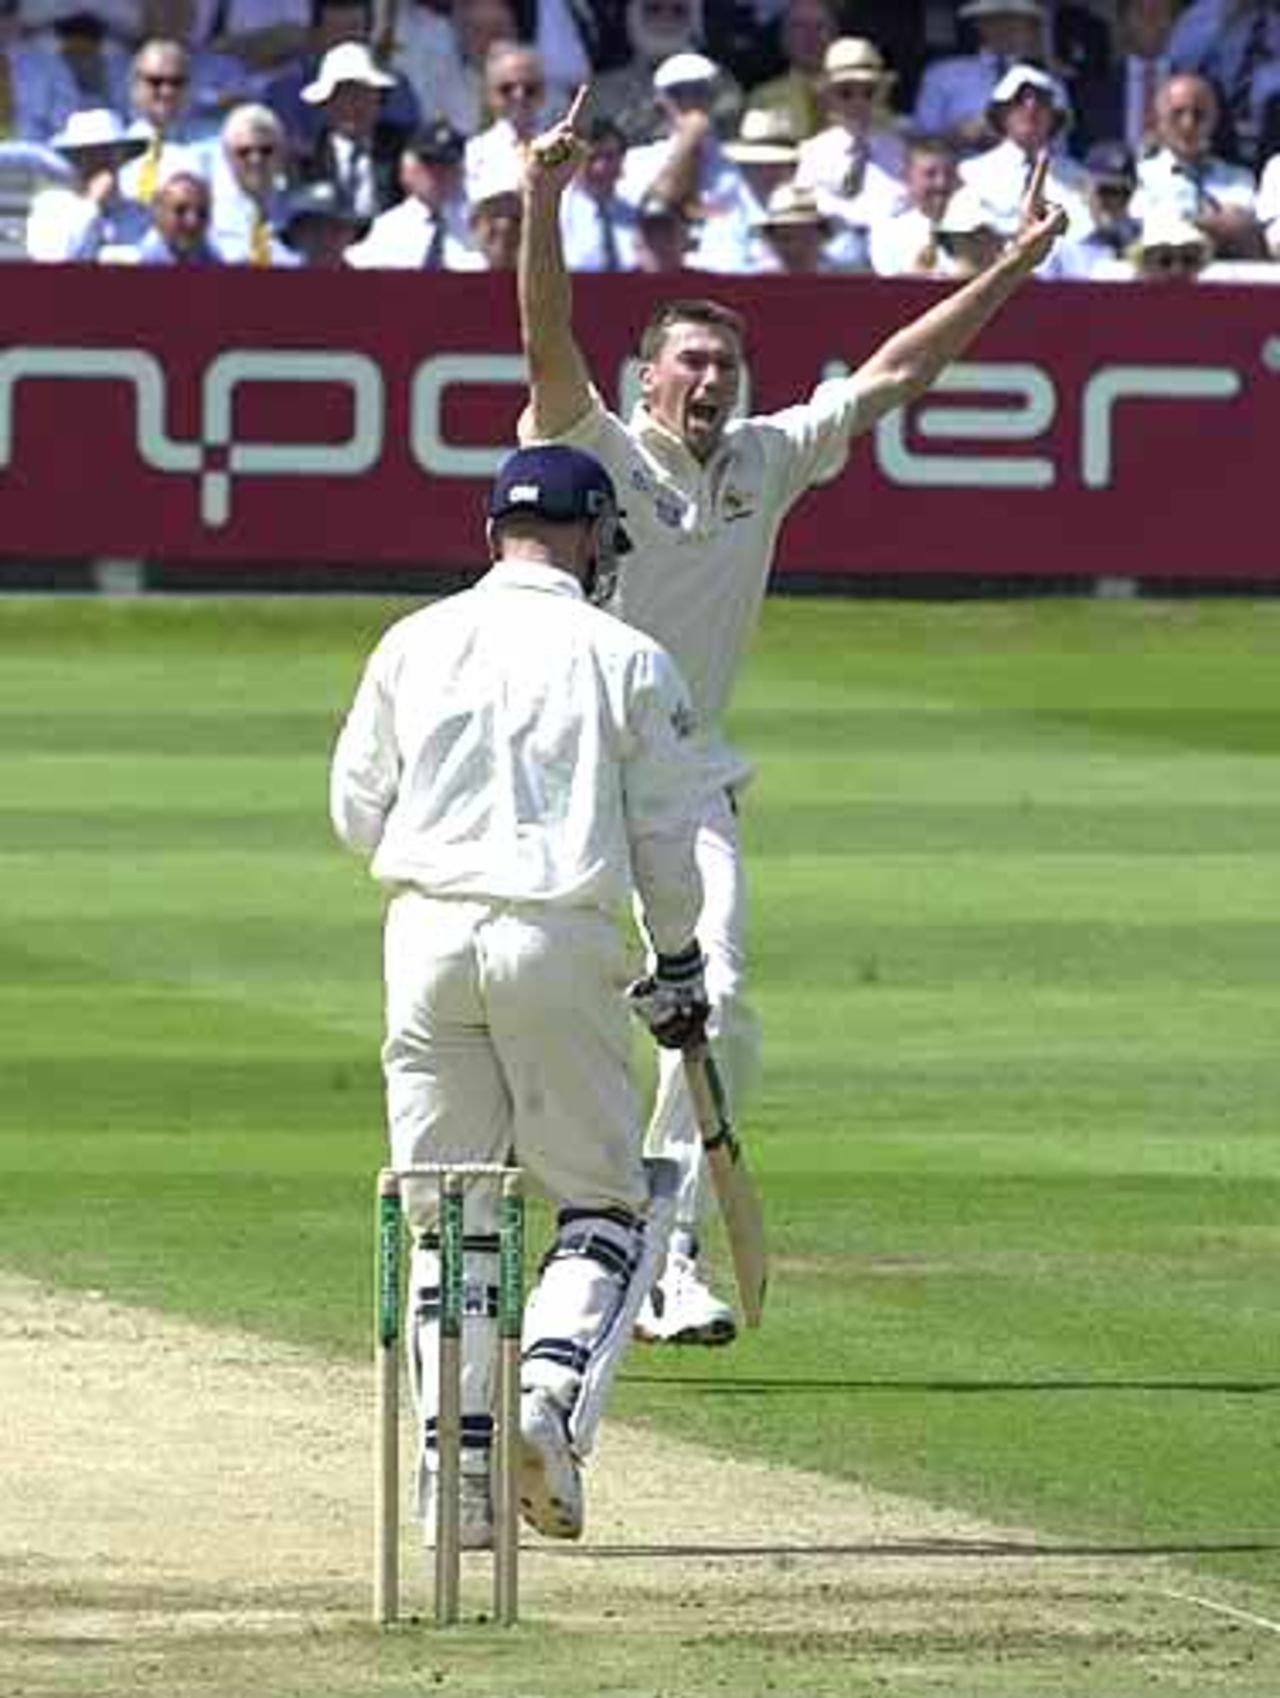 England v Australia, The Ashes 2nd npower Test, Lords, 19-23 July 2001